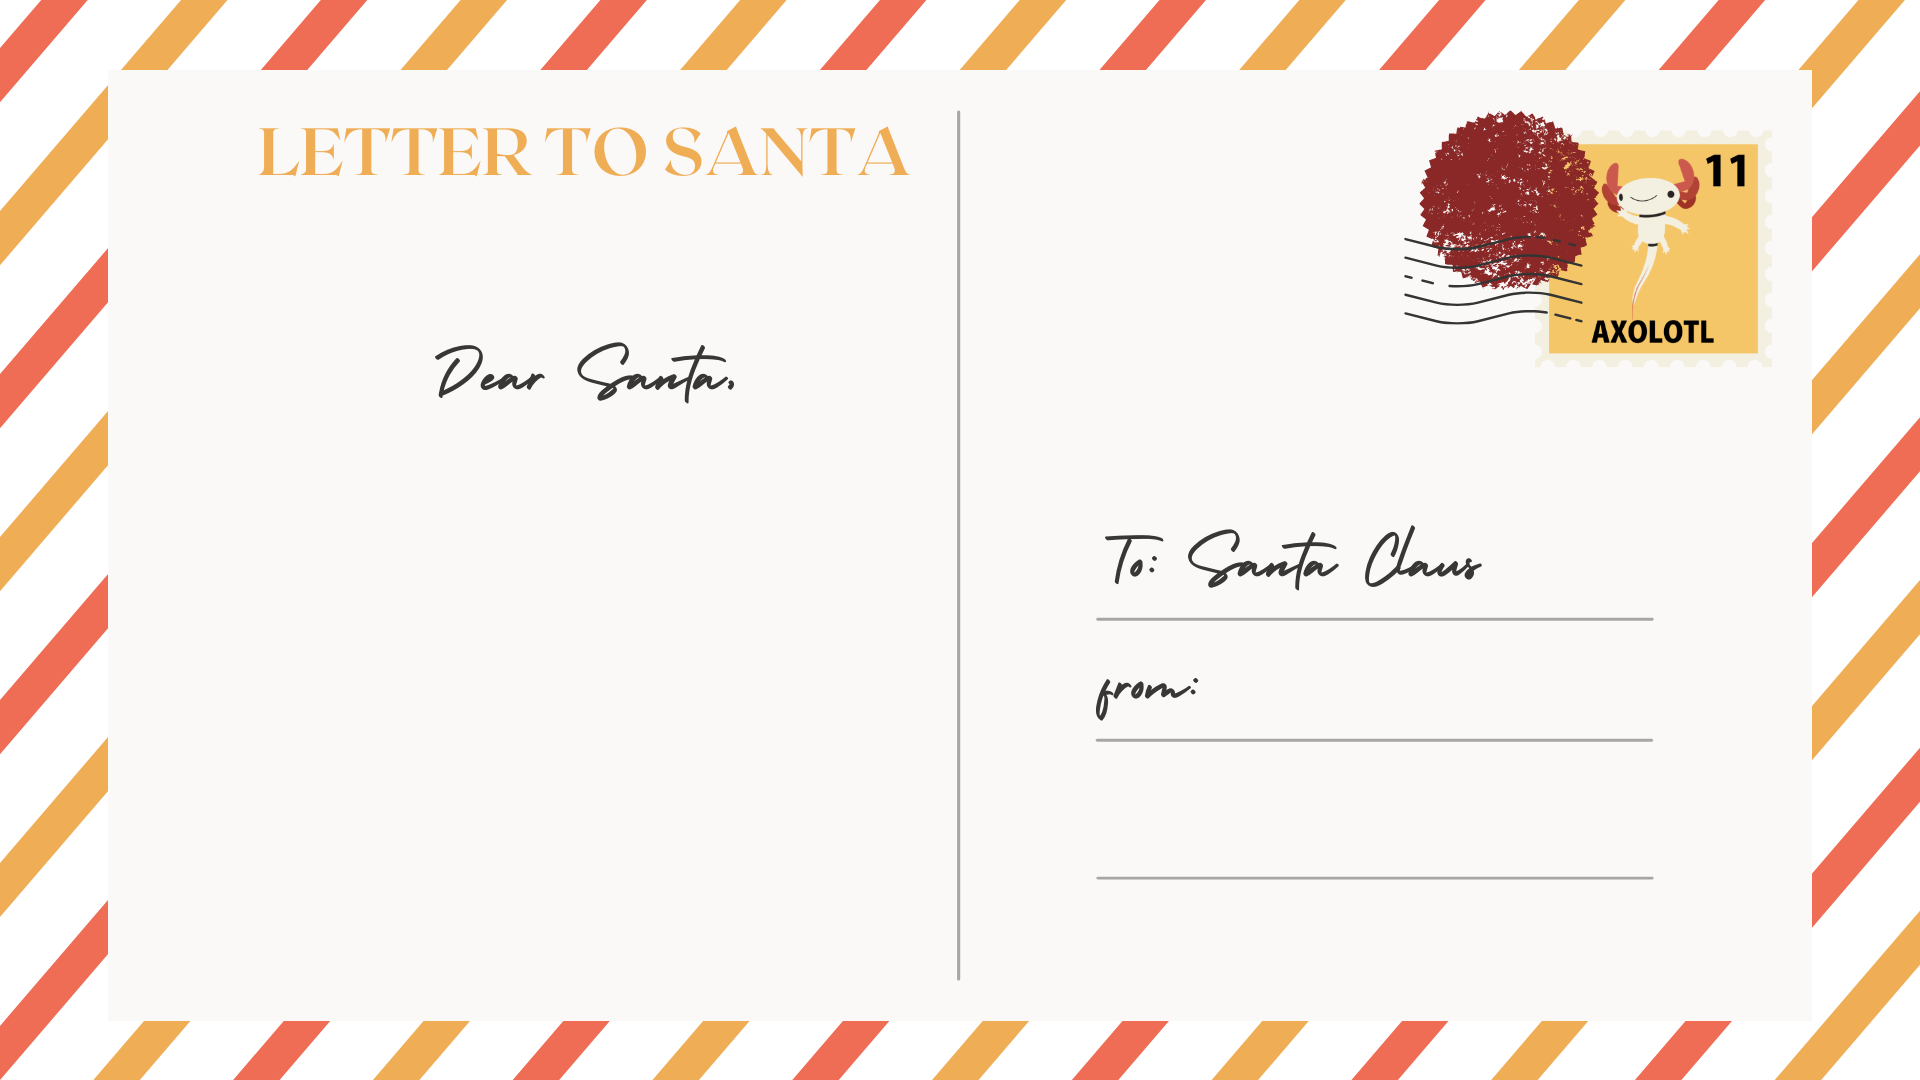 Write your letter to Santa Claus, here!